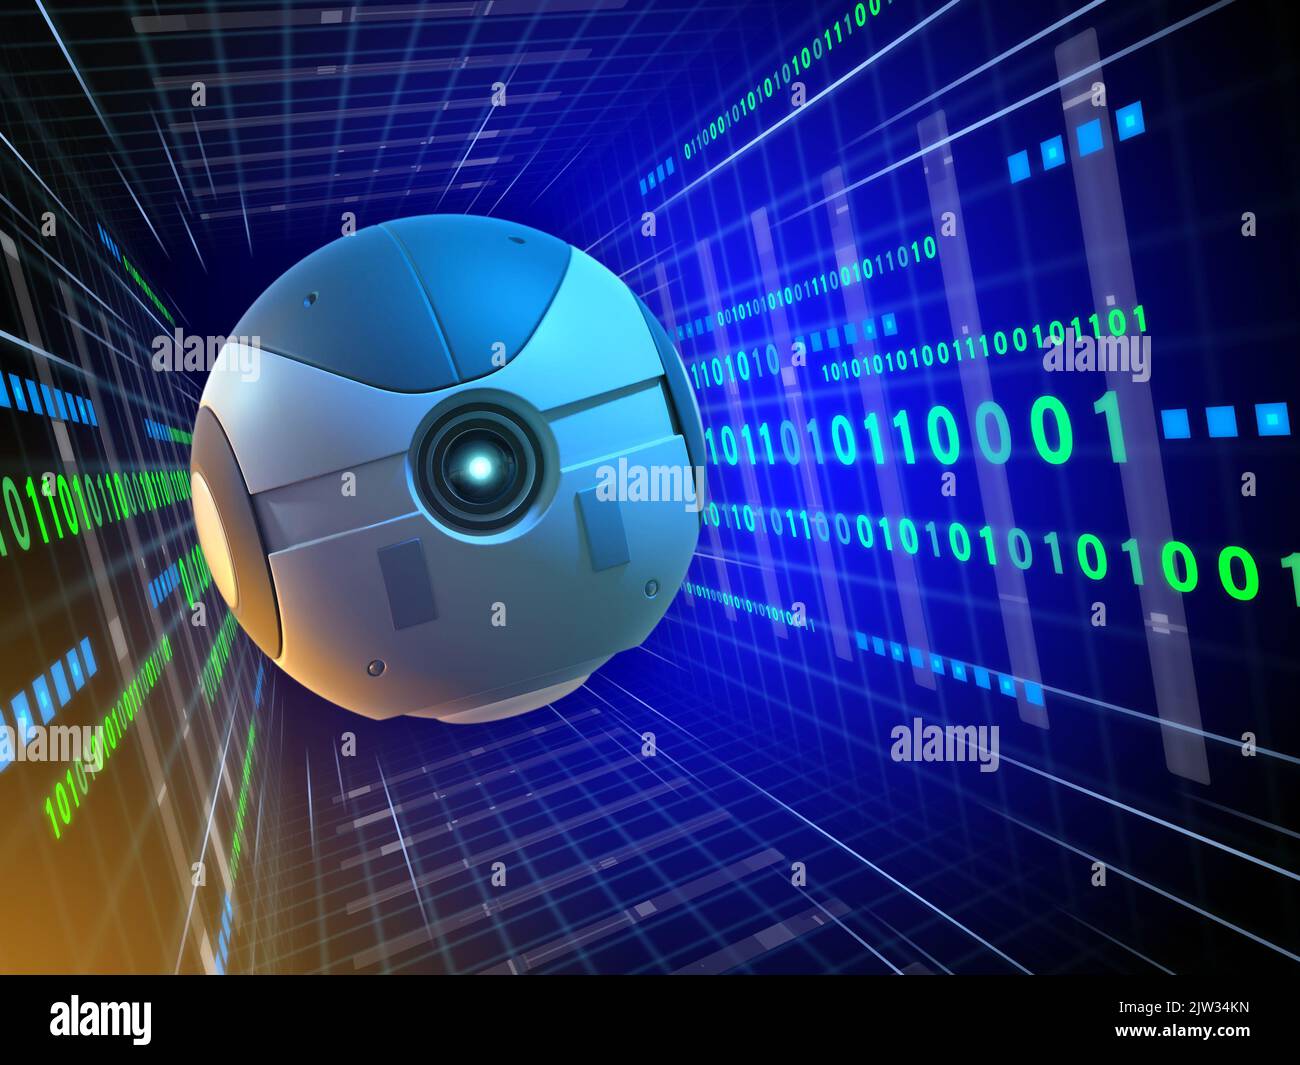 Spherical device travelling in a code tunnel. Digital illustration Stock Photo